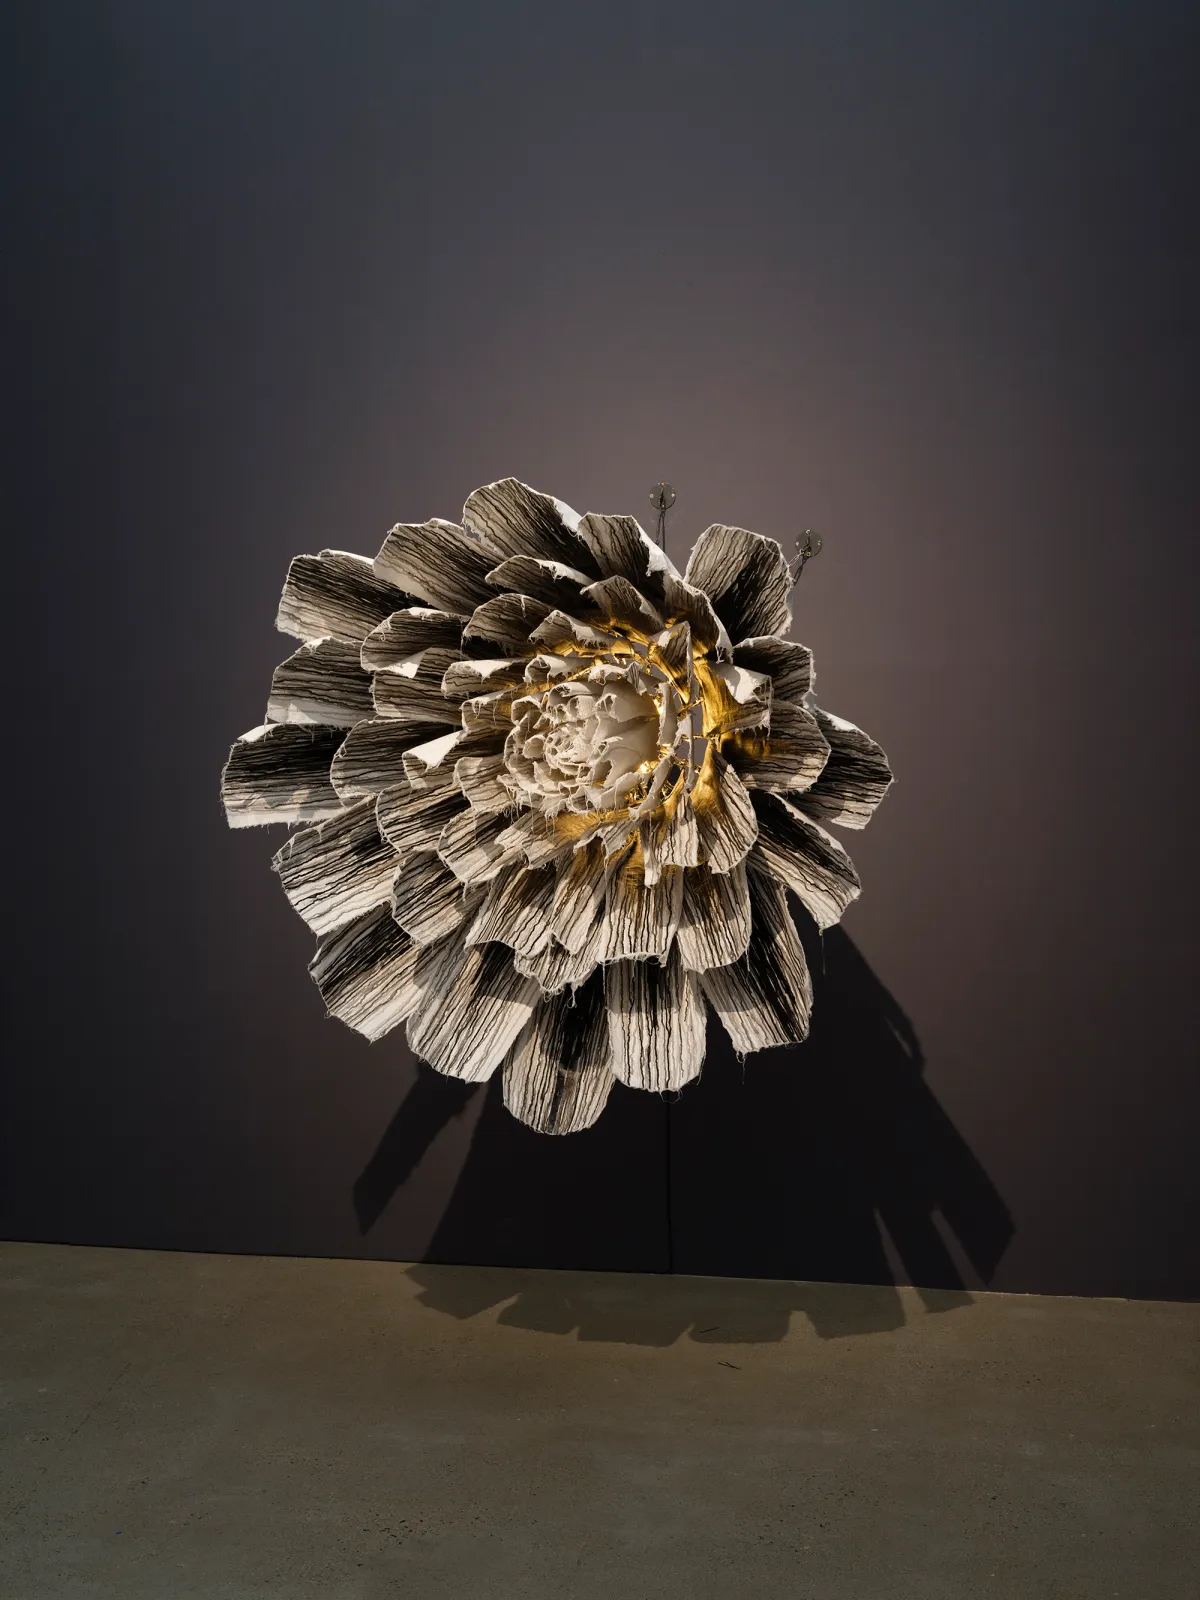 A wall-mounted art installation, reminiscent of a blooming flower, with a bright light at the center against a black wall.